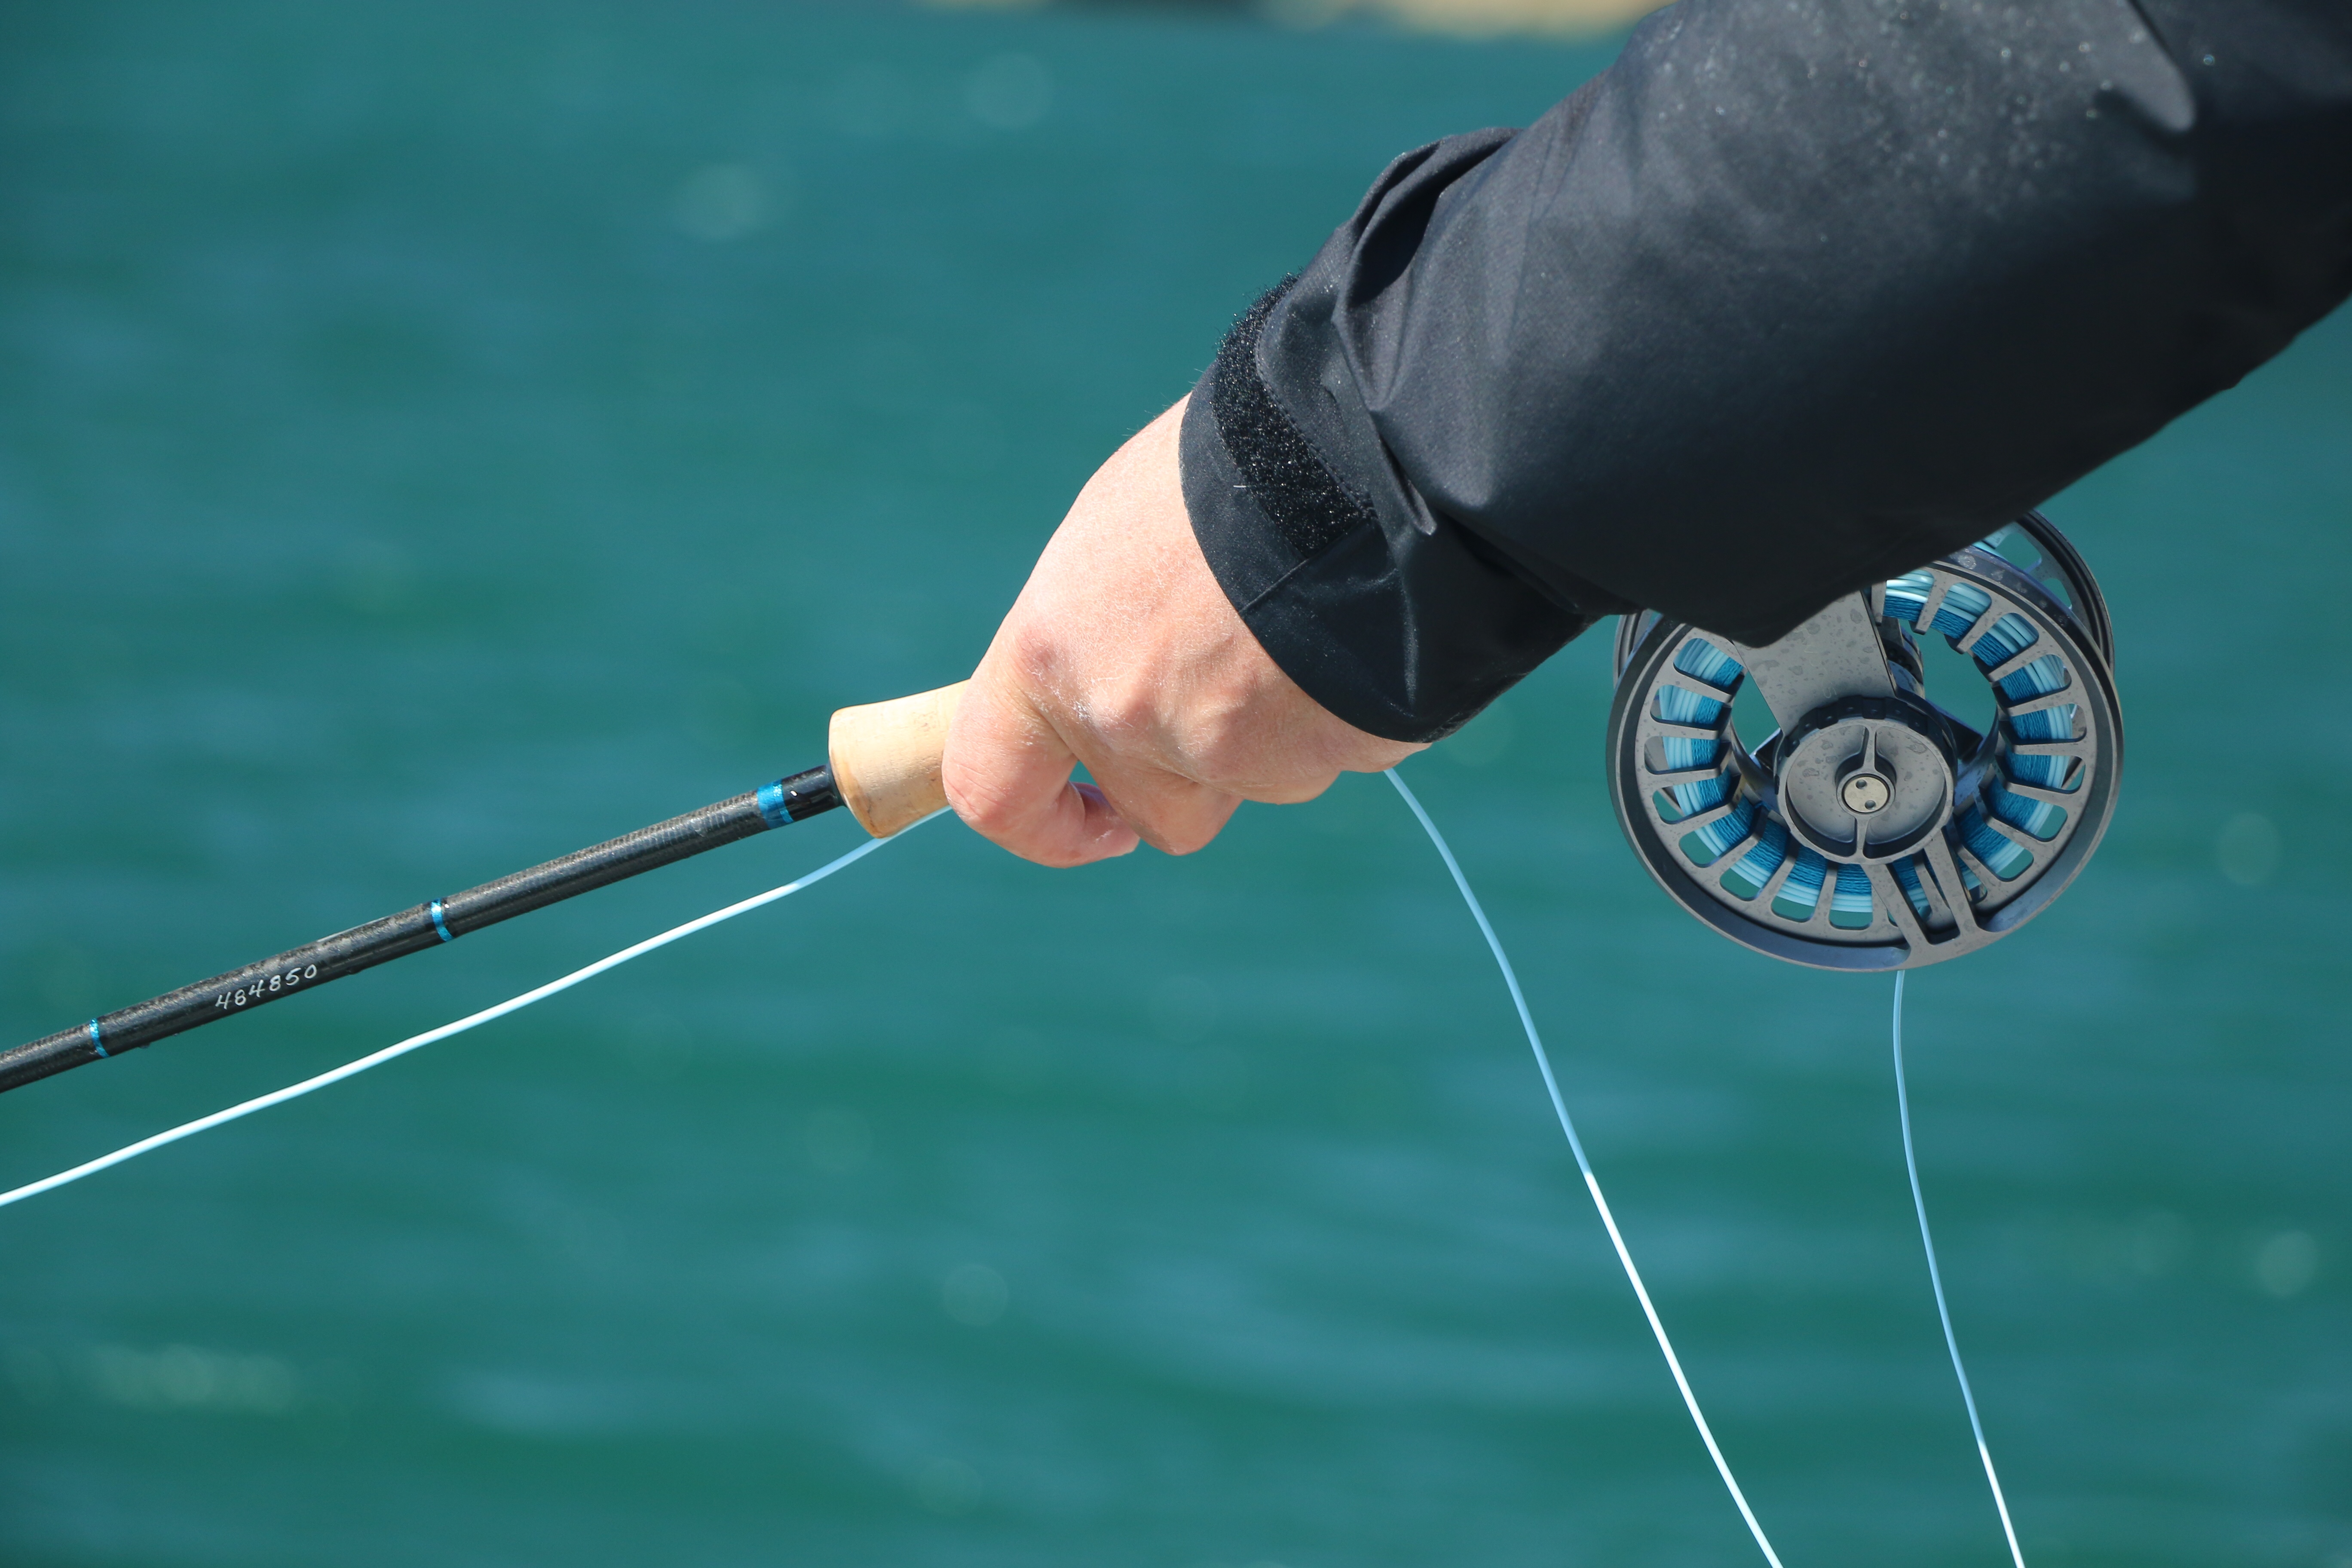 Lamson Cobalt, Scott sector, kingfish, salt water fly, charter, guide, boat, flats, fly rod, fly reel, New Zealand, harbour